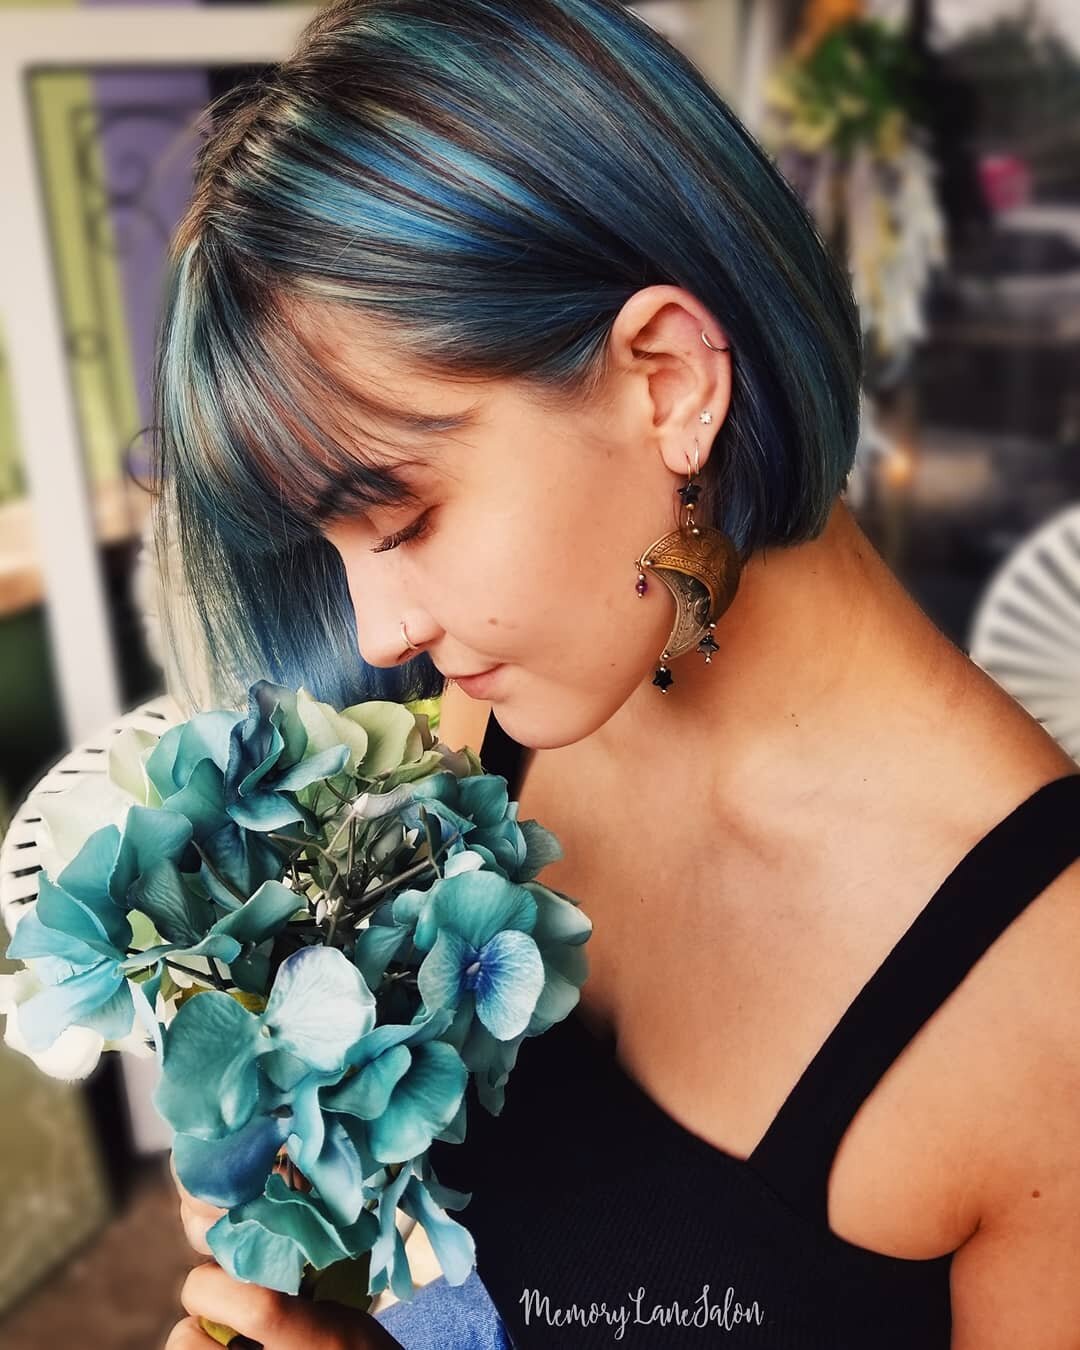 Vintage Peacock Blue 💙 🦚 @watercolorshair obsessed🥰
Absolutely the easiest way to switch up your hair color...express your inner unicorn!🦄
Couldn't have asked for a more stunning model @greenbeannhead
#watercolorshaircare
#watercolor #memorylanes